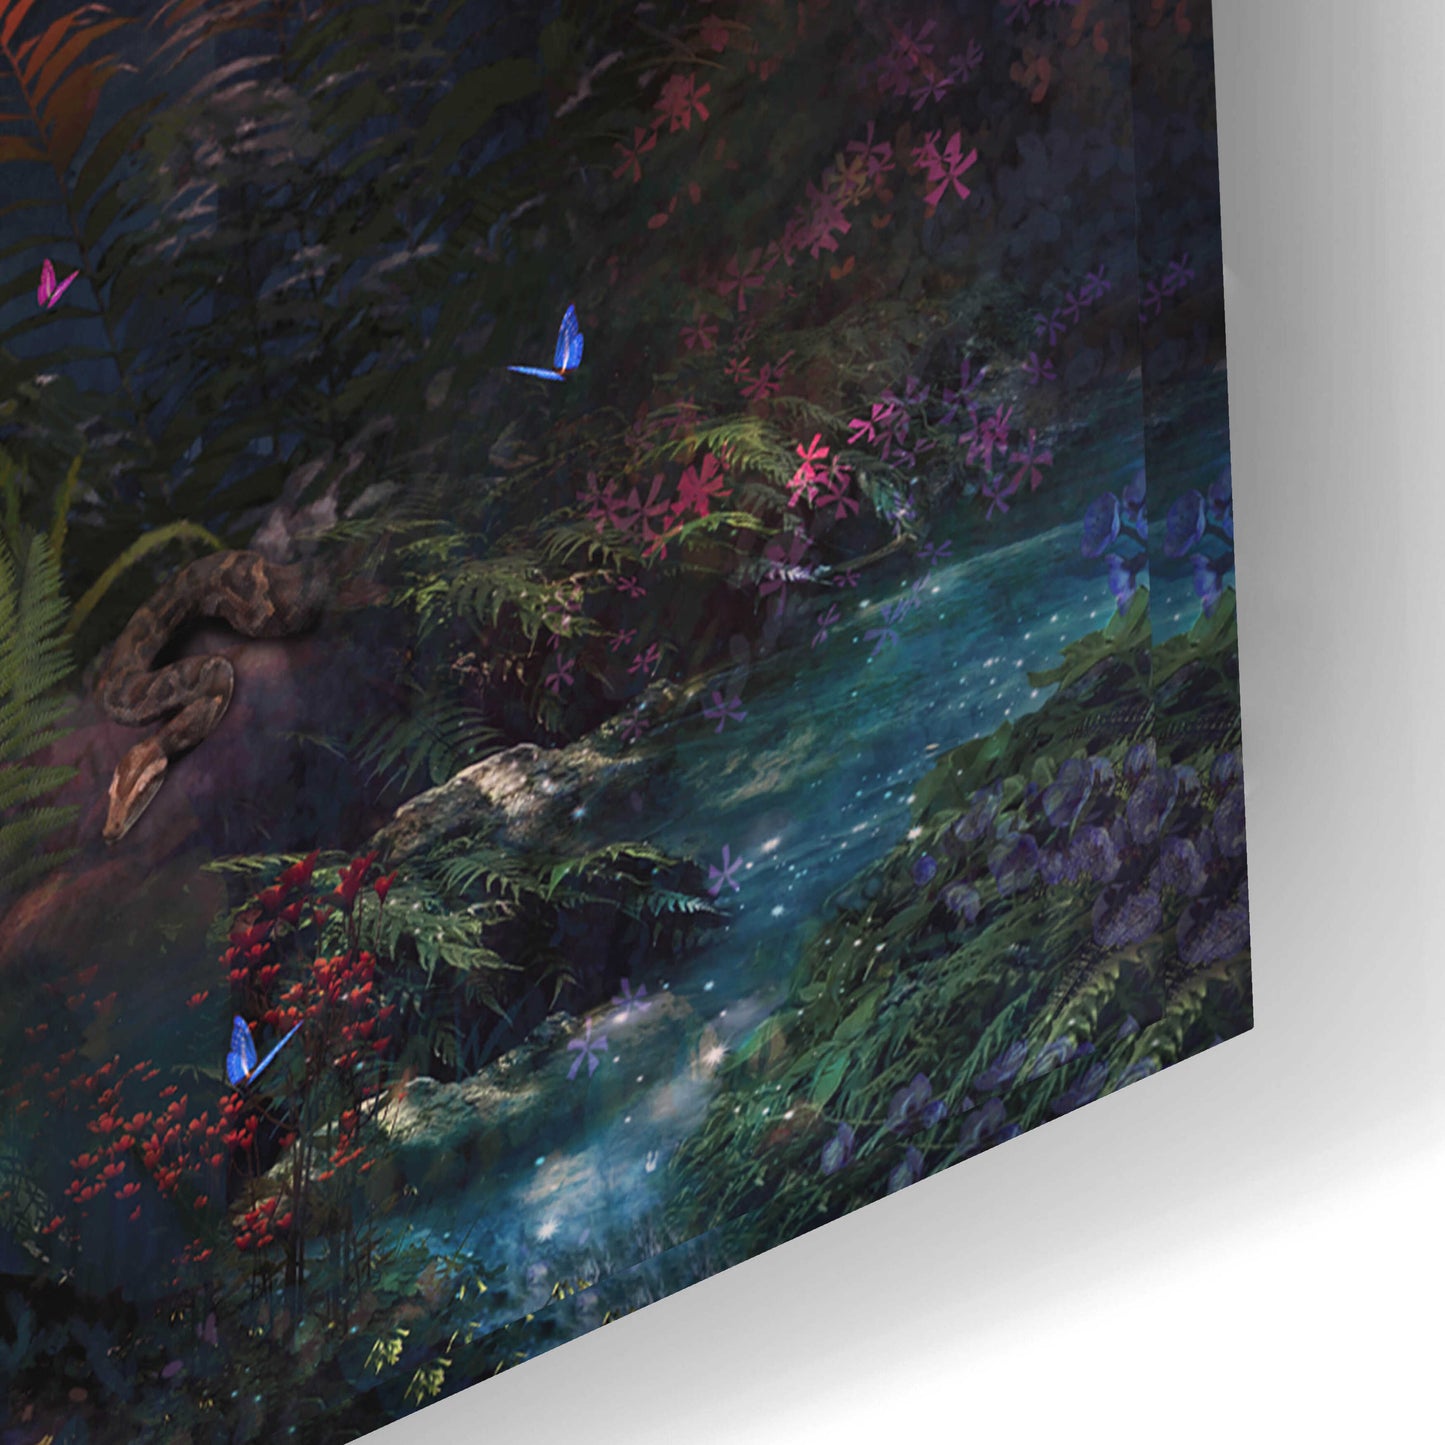 Epic Art 'A Magical Existence' by Cameron Gray, Acrylic Glass Wall Art,24x16